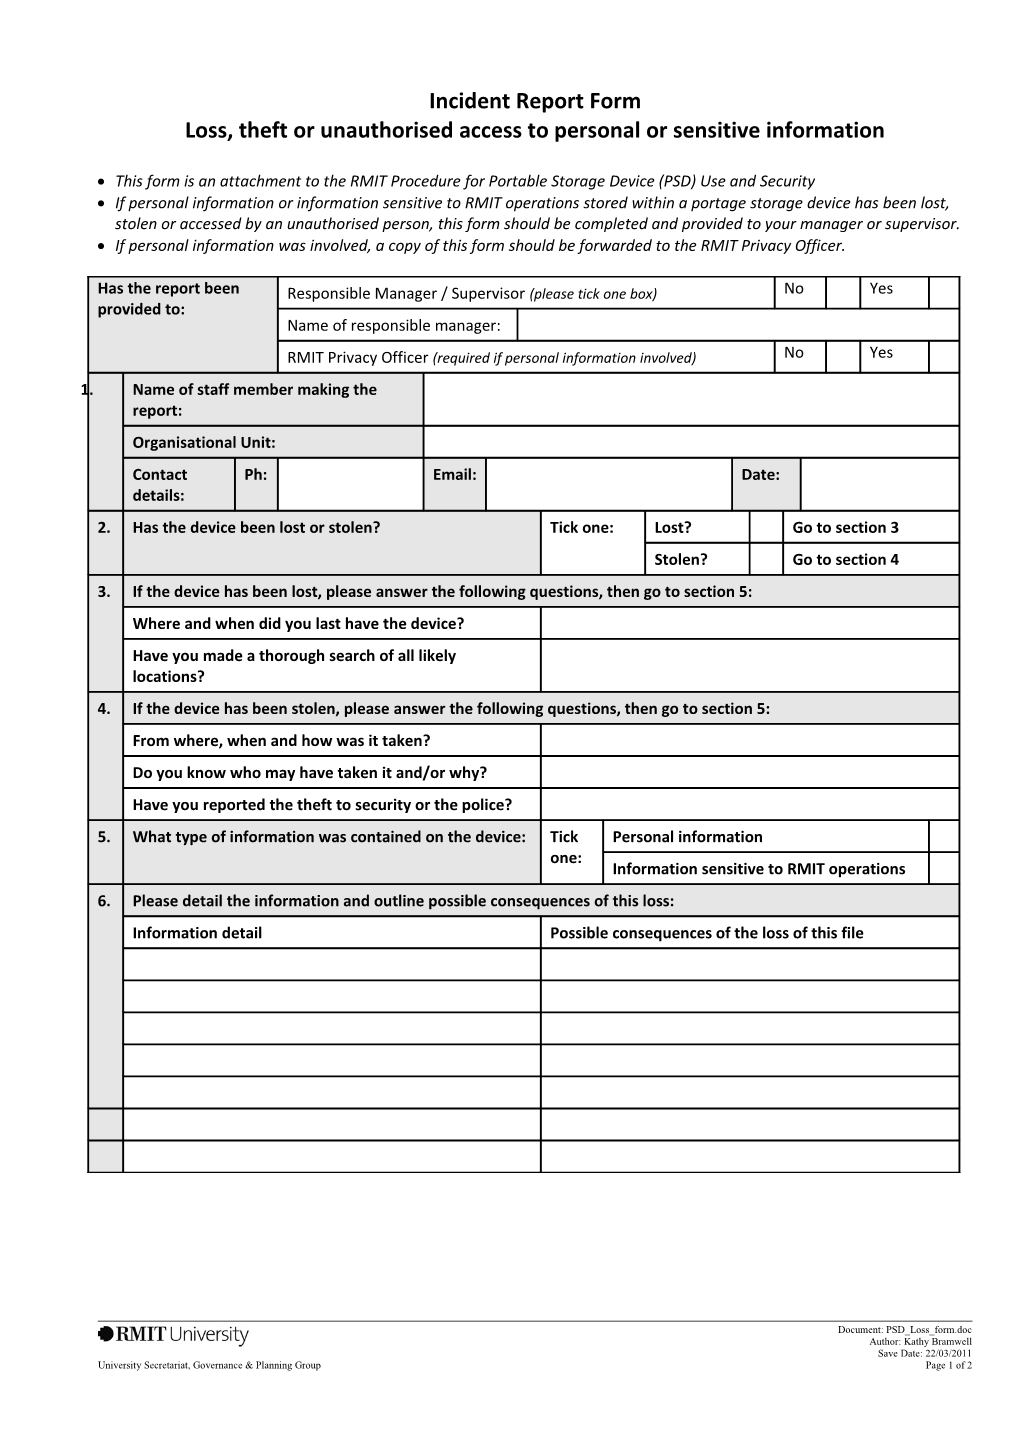 Compliance Breach Response and Notification Form